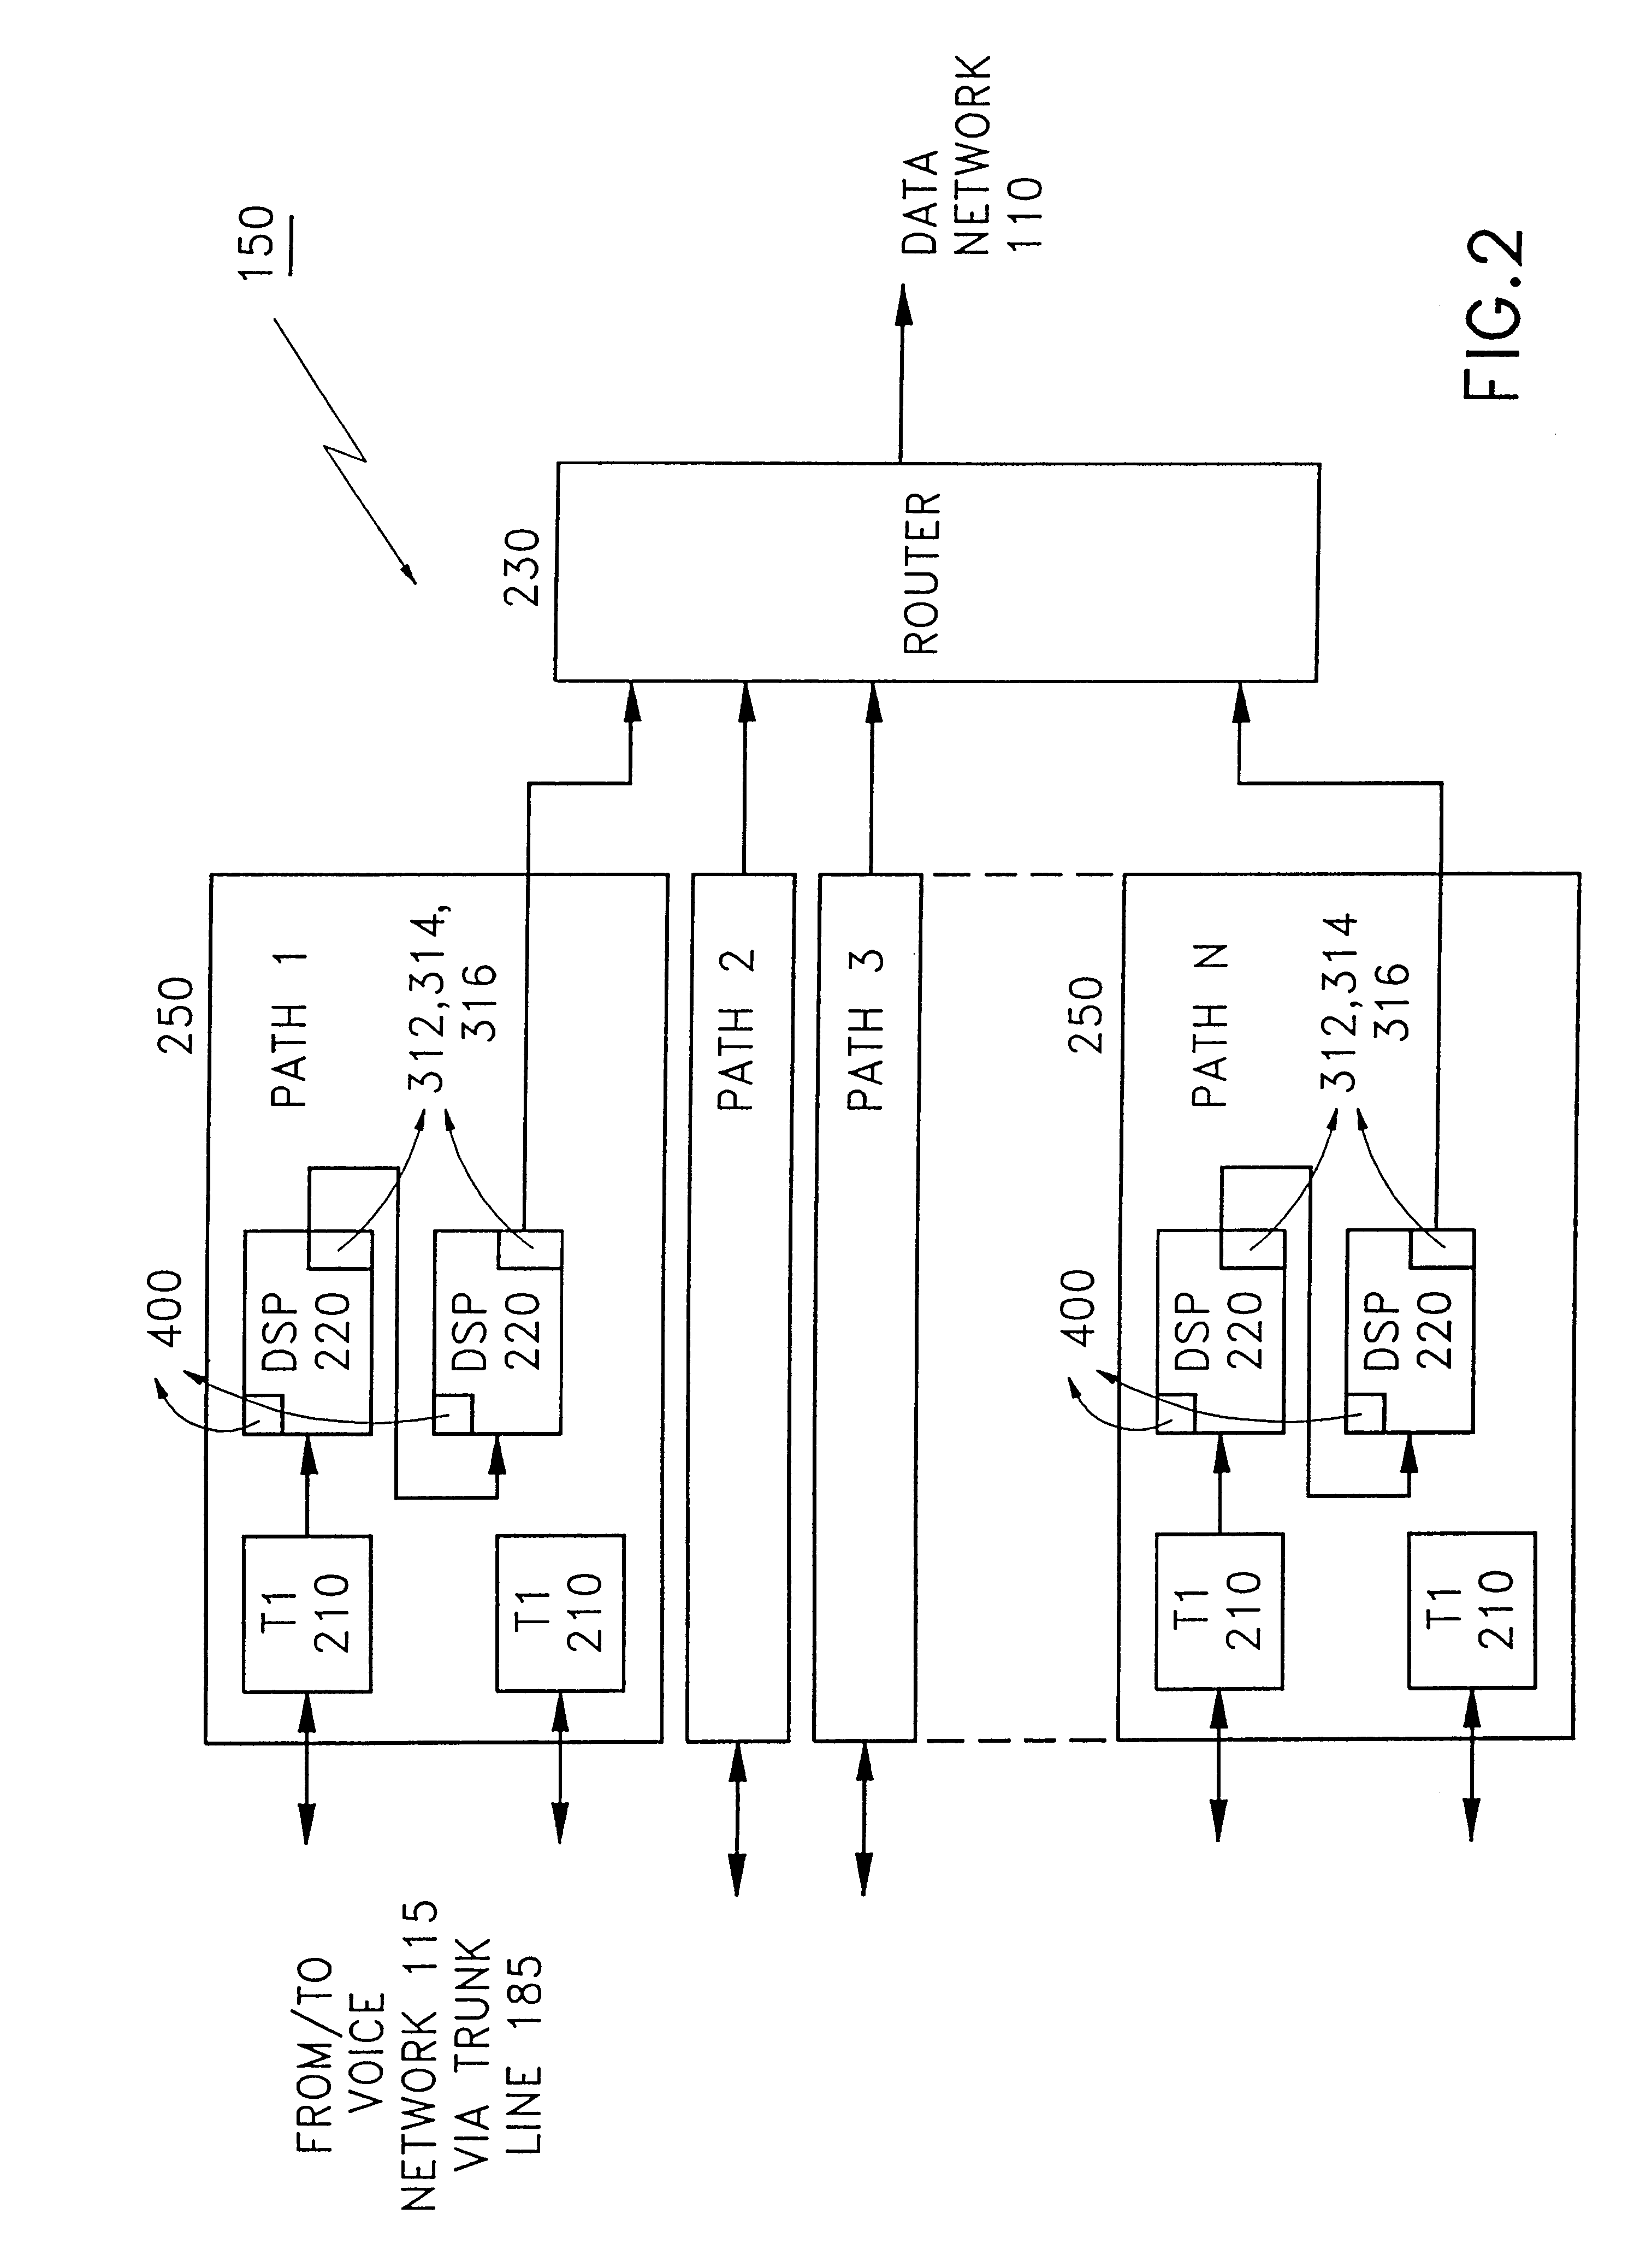 Multipoint simultaneous voice and data services using a media splitter gateway architecture